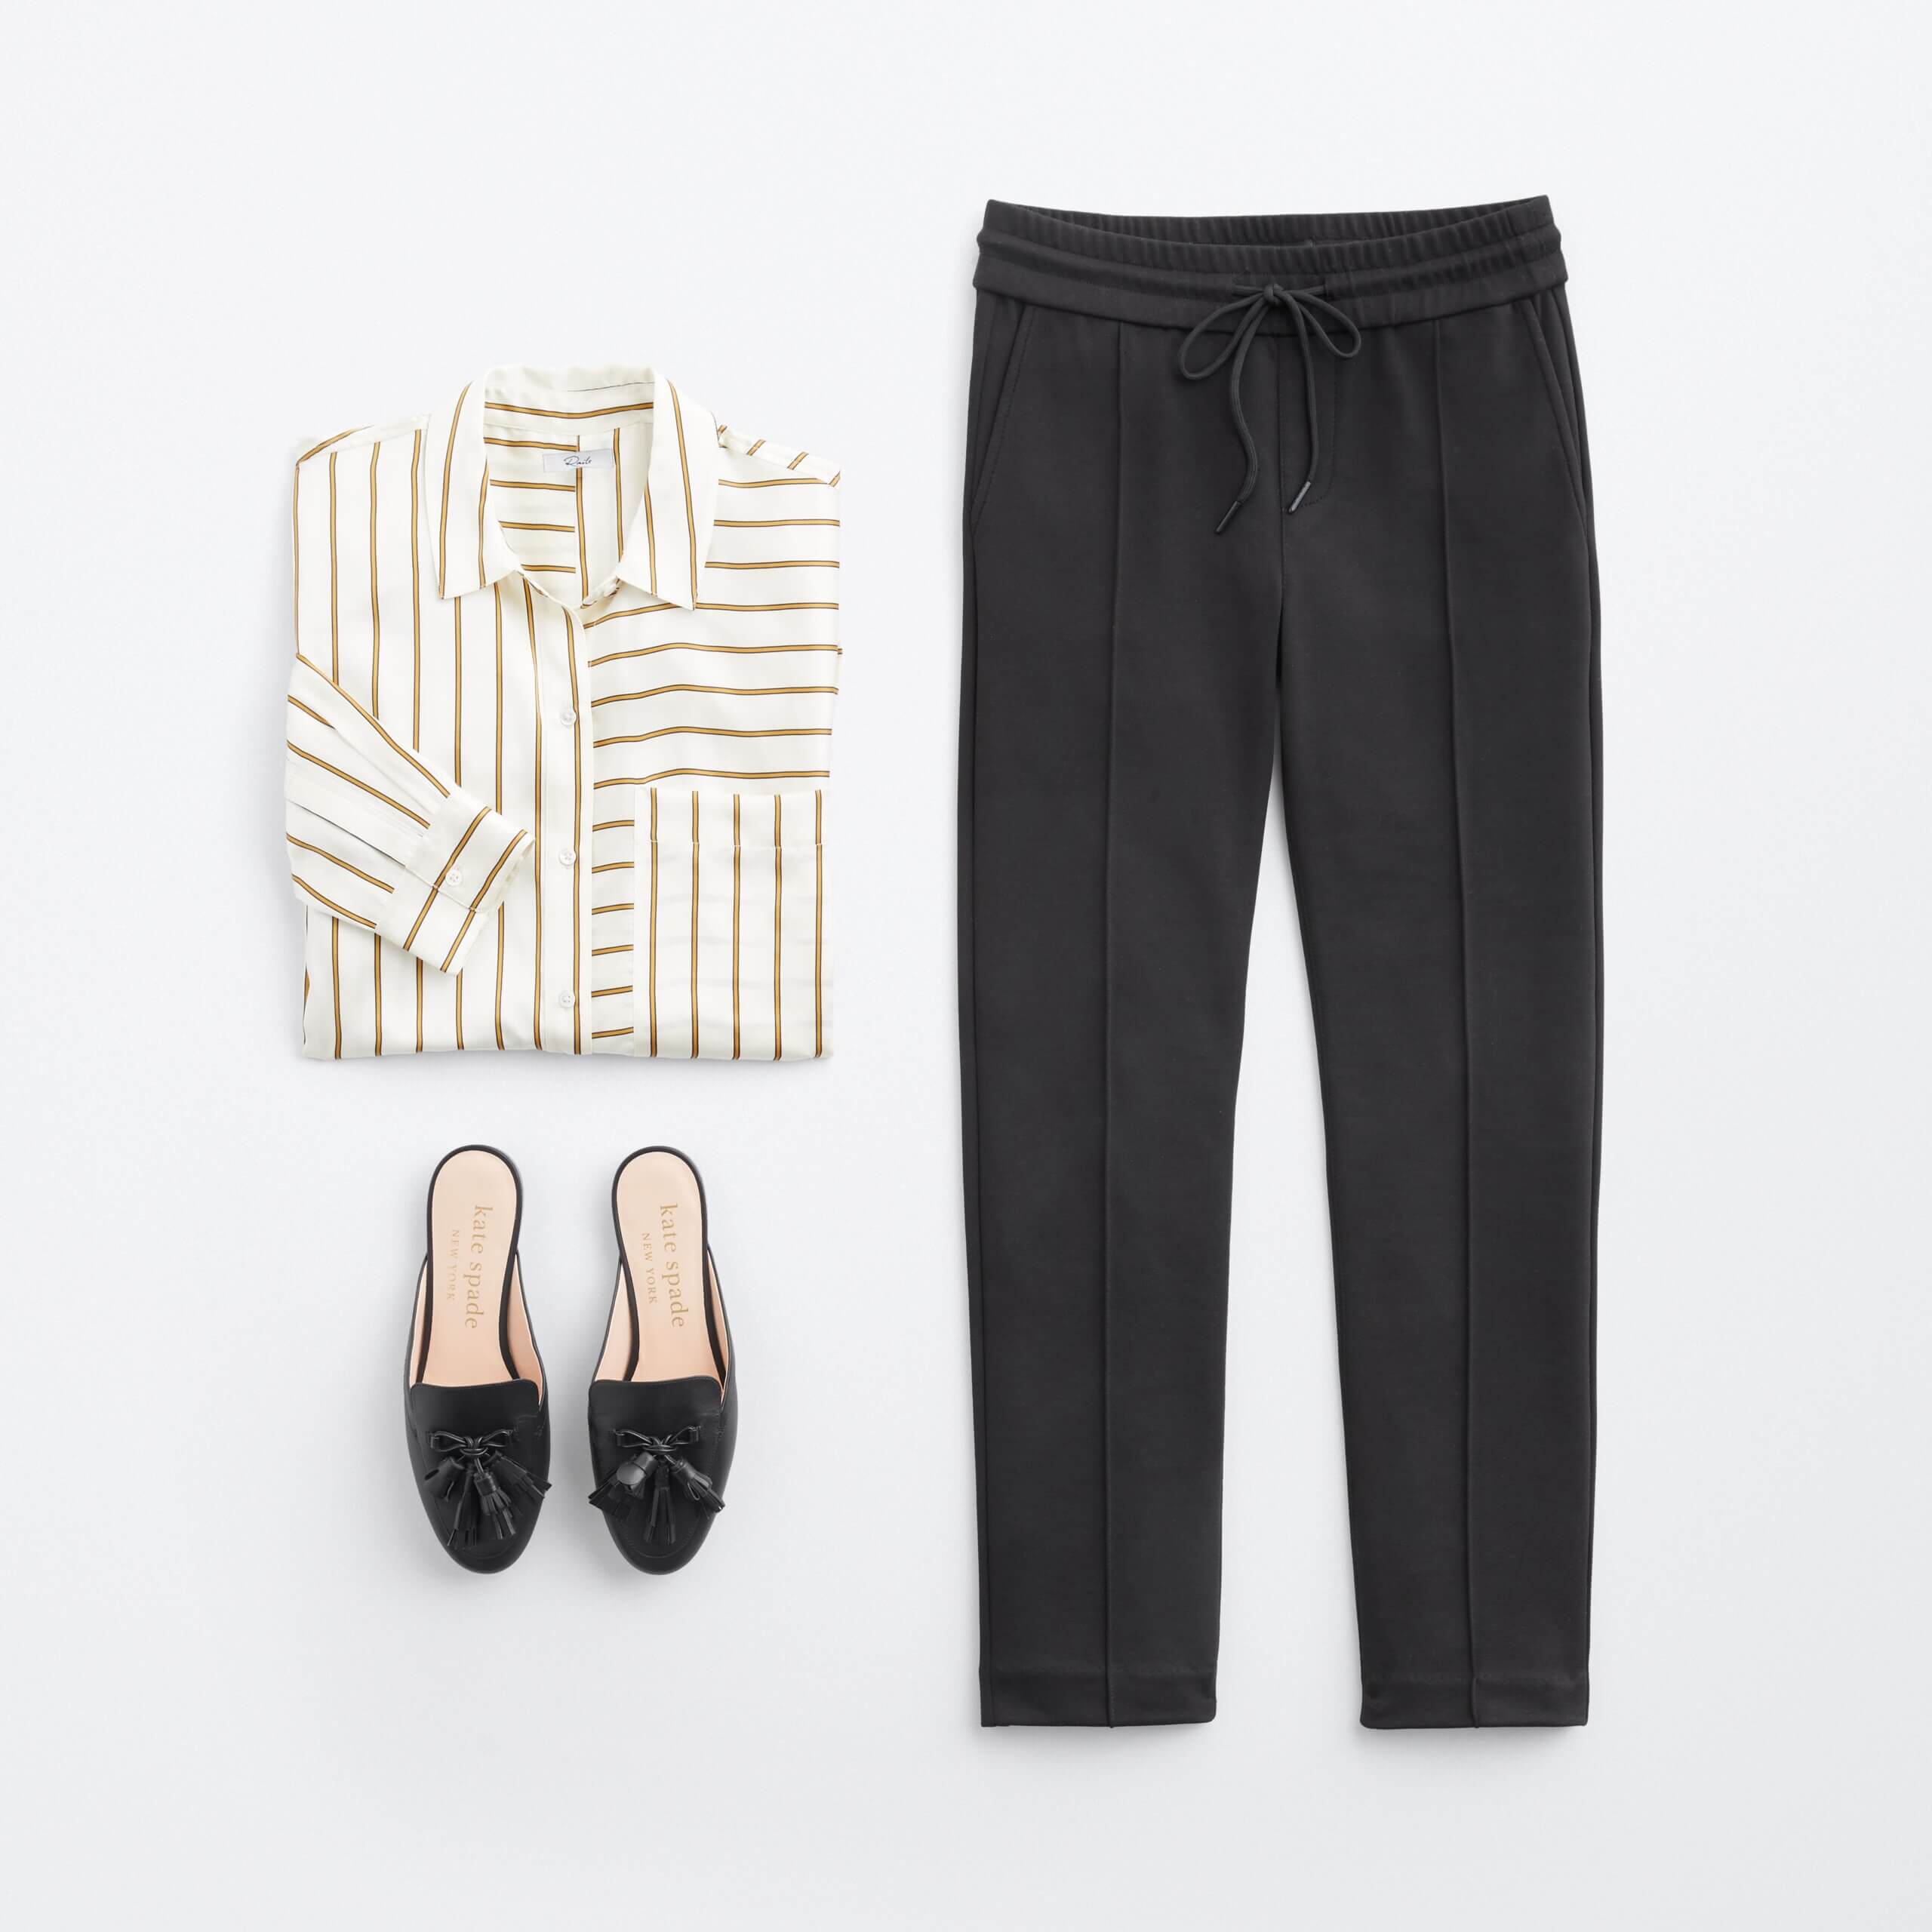 Stitch Fix Women's outfit laydown featuring white silk button-down blouse with gold striped, black ankle-length trousers and black leather flats. 